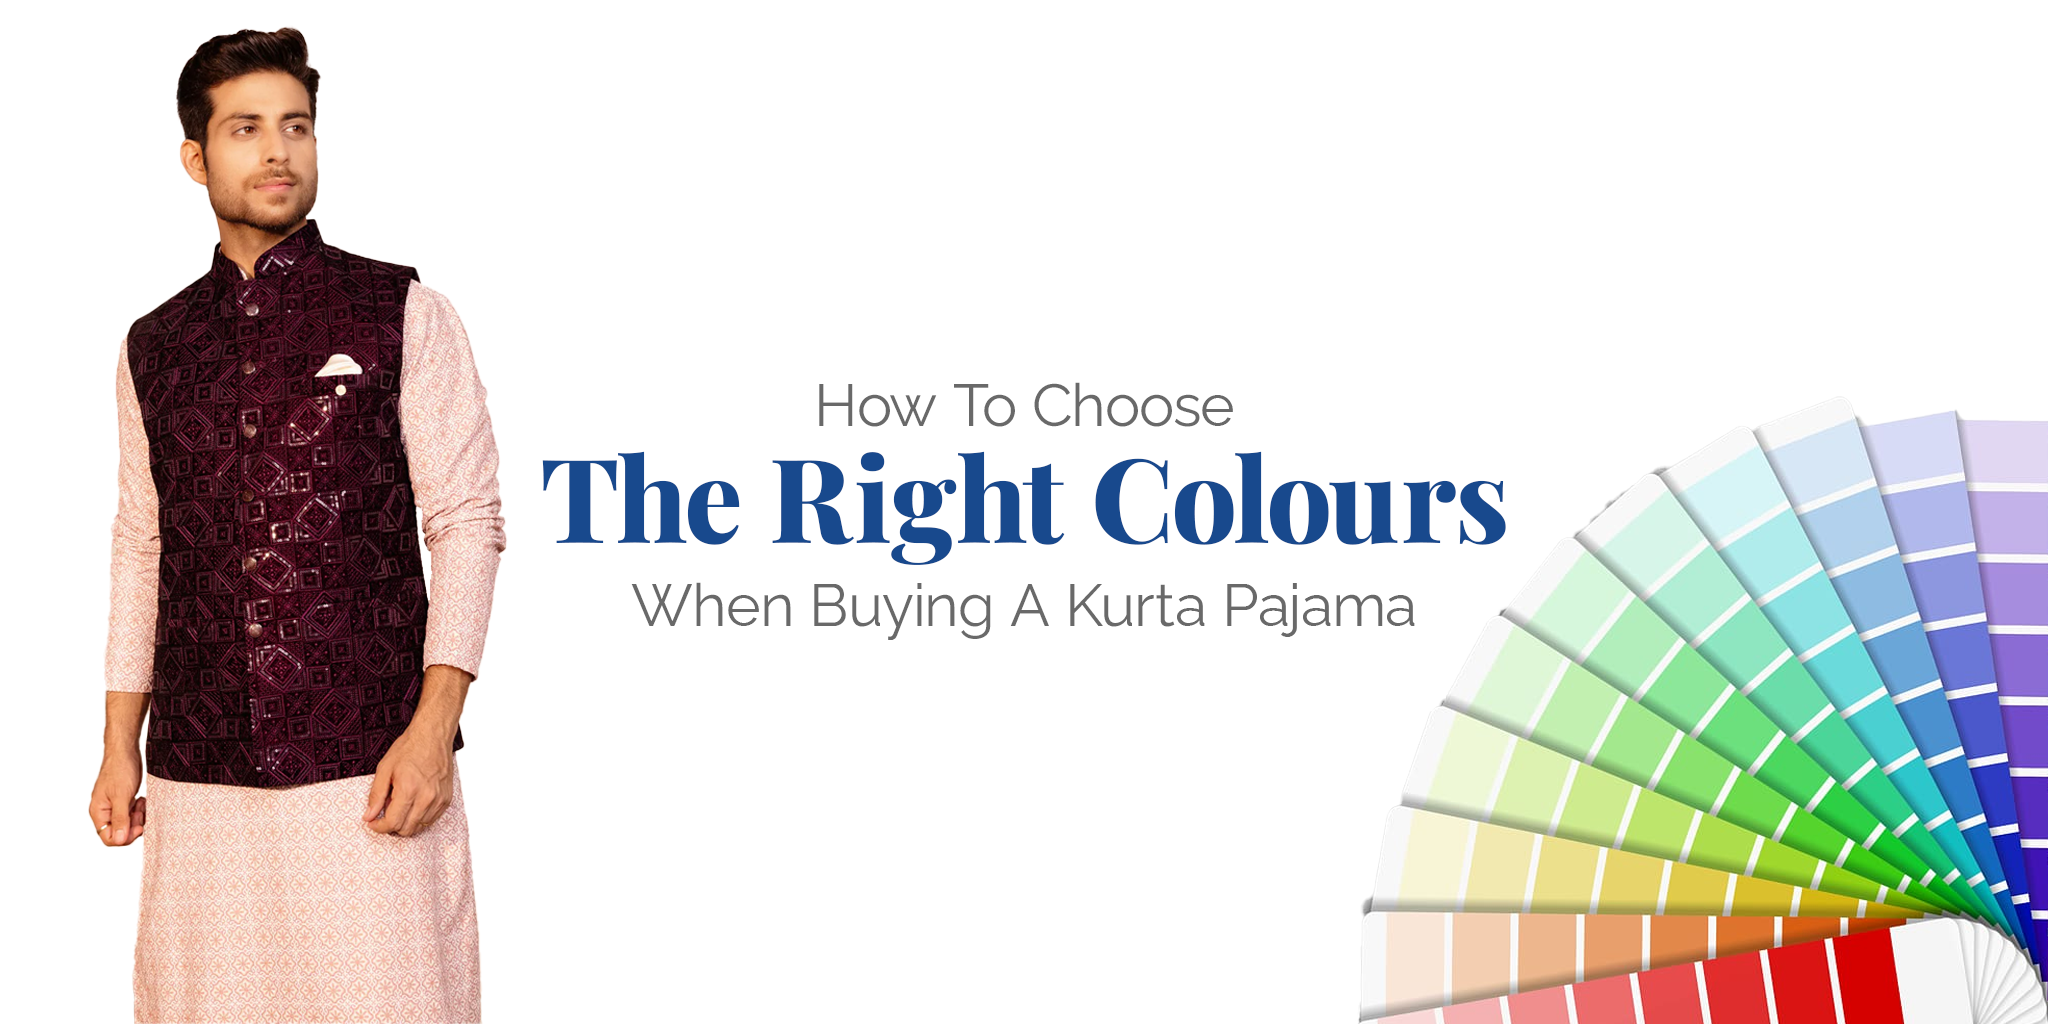 How To Choose The Right Colours When Buying A Kurta Pajama